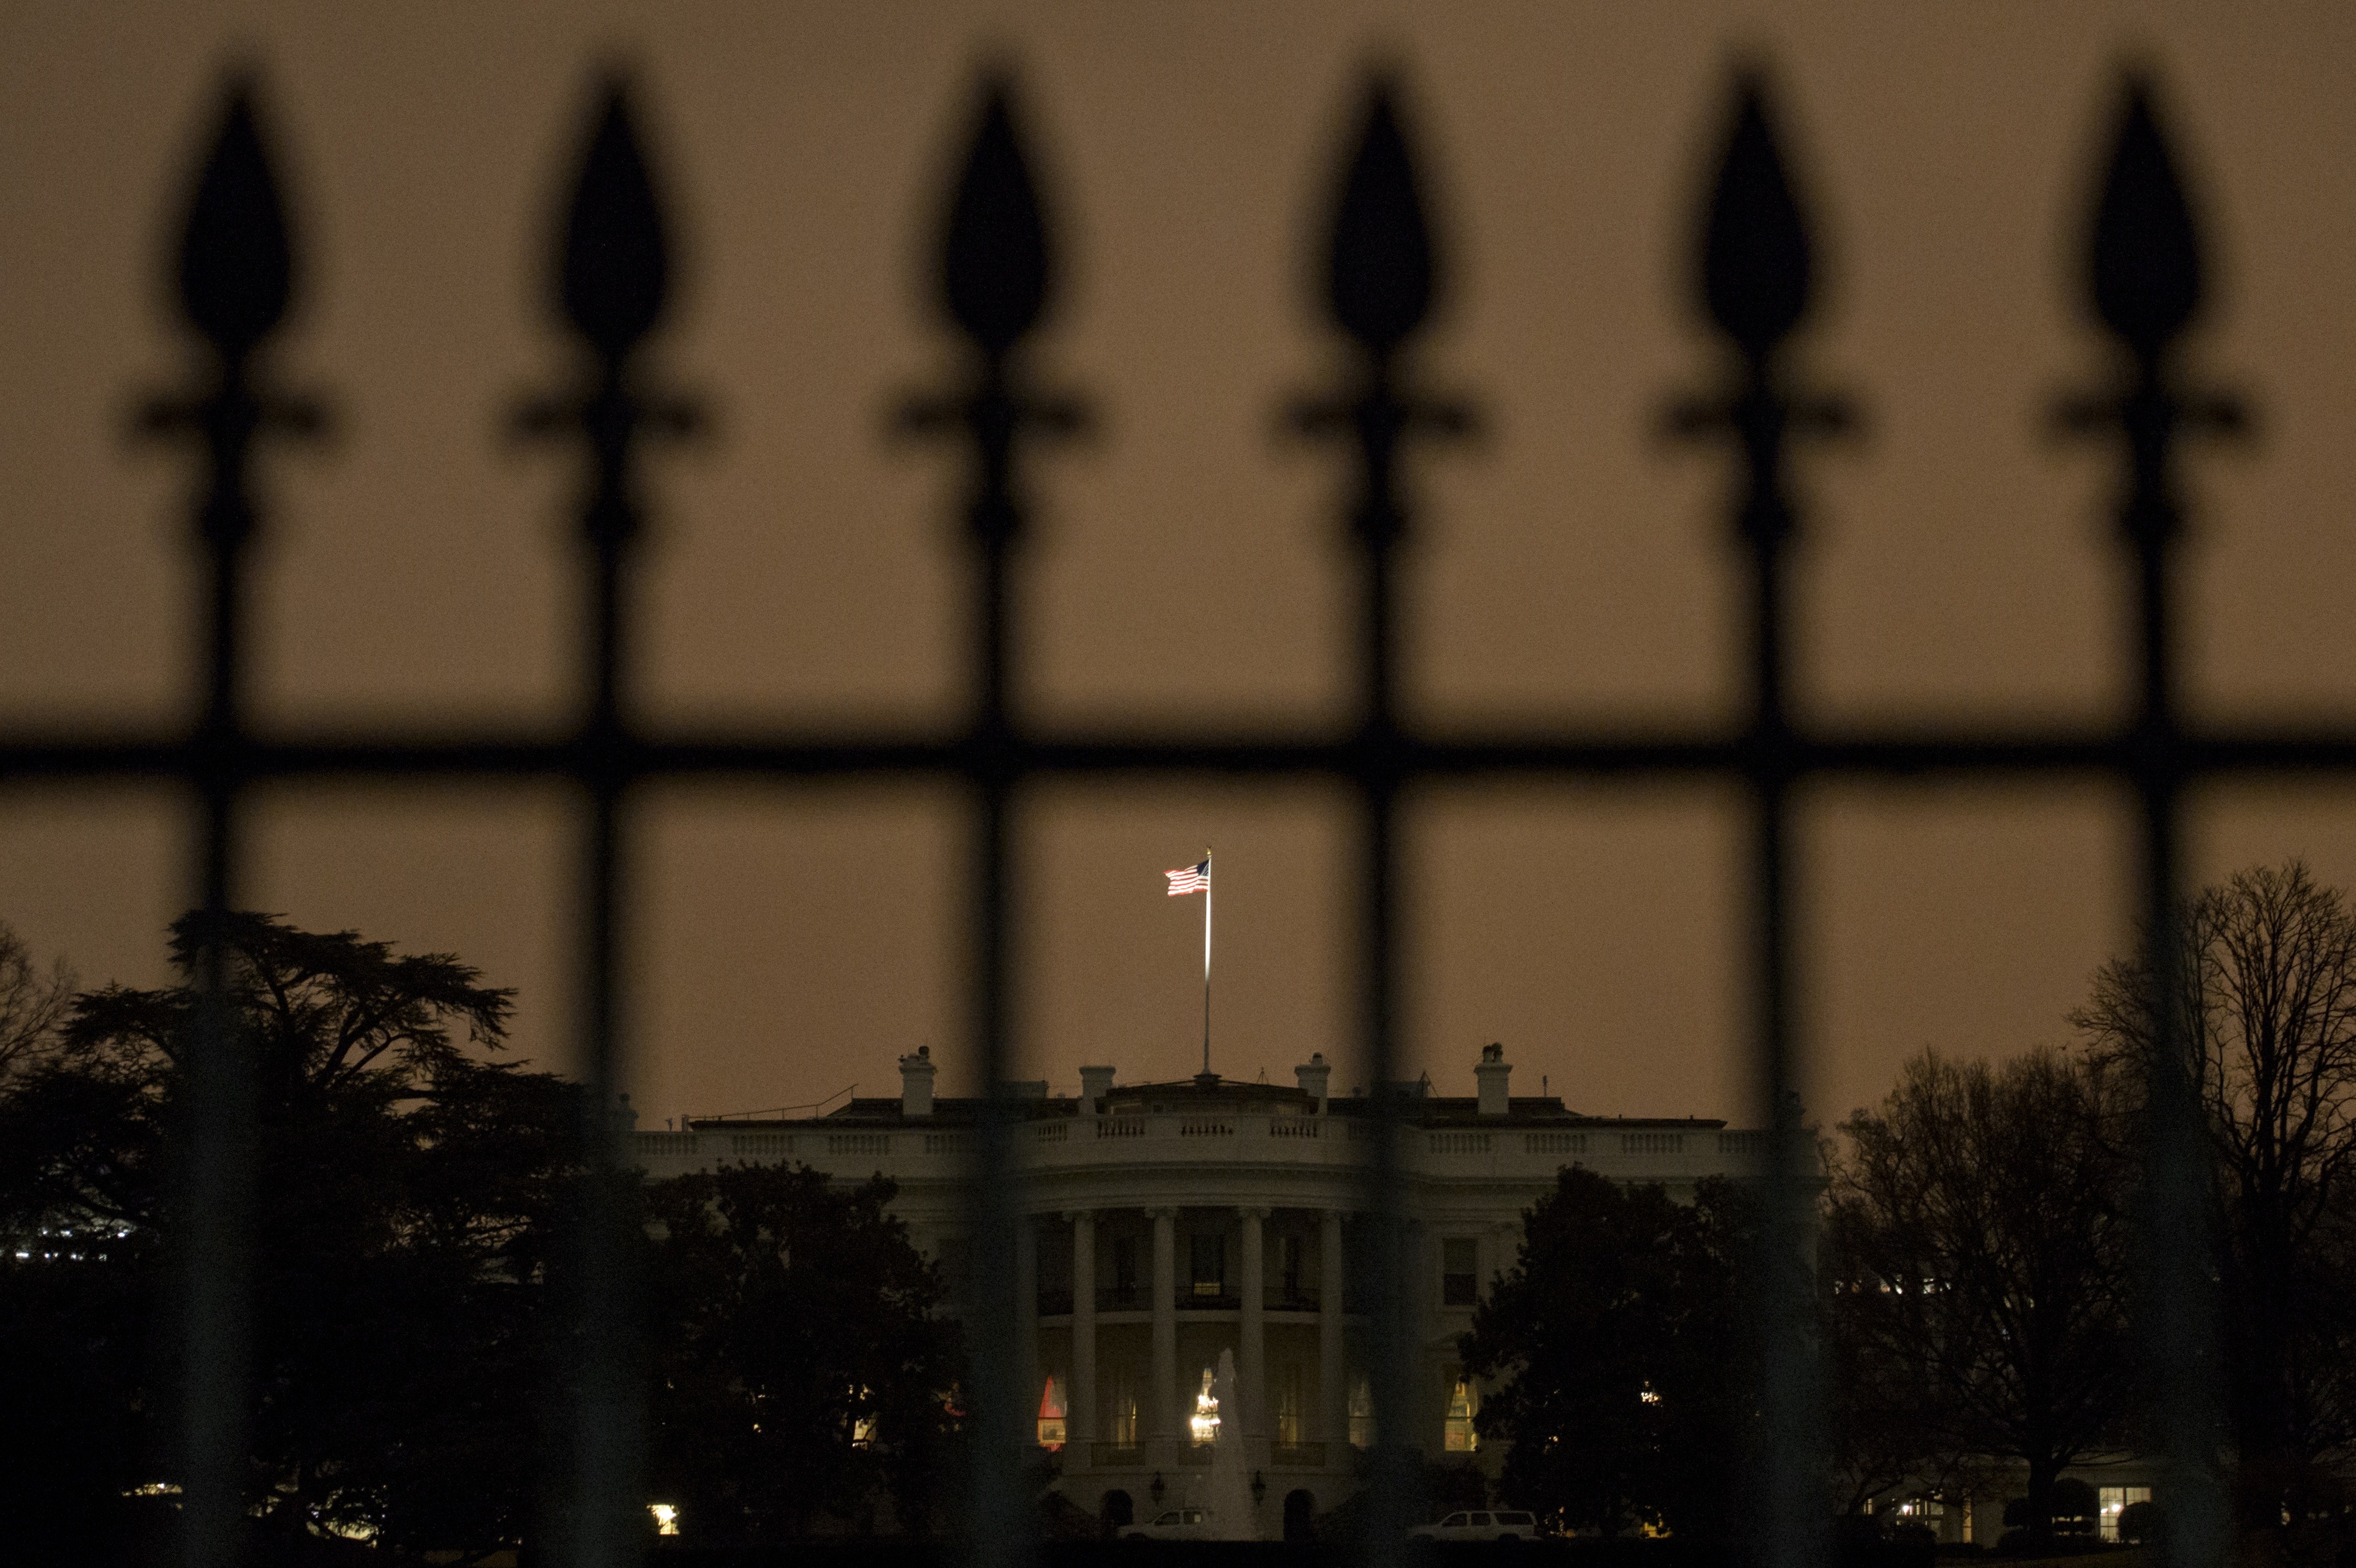 The south side of the White House is seen January 26, 2015 in Washington, D.C. (Brendan Smialowski&mdash;AFP/Getty Images)